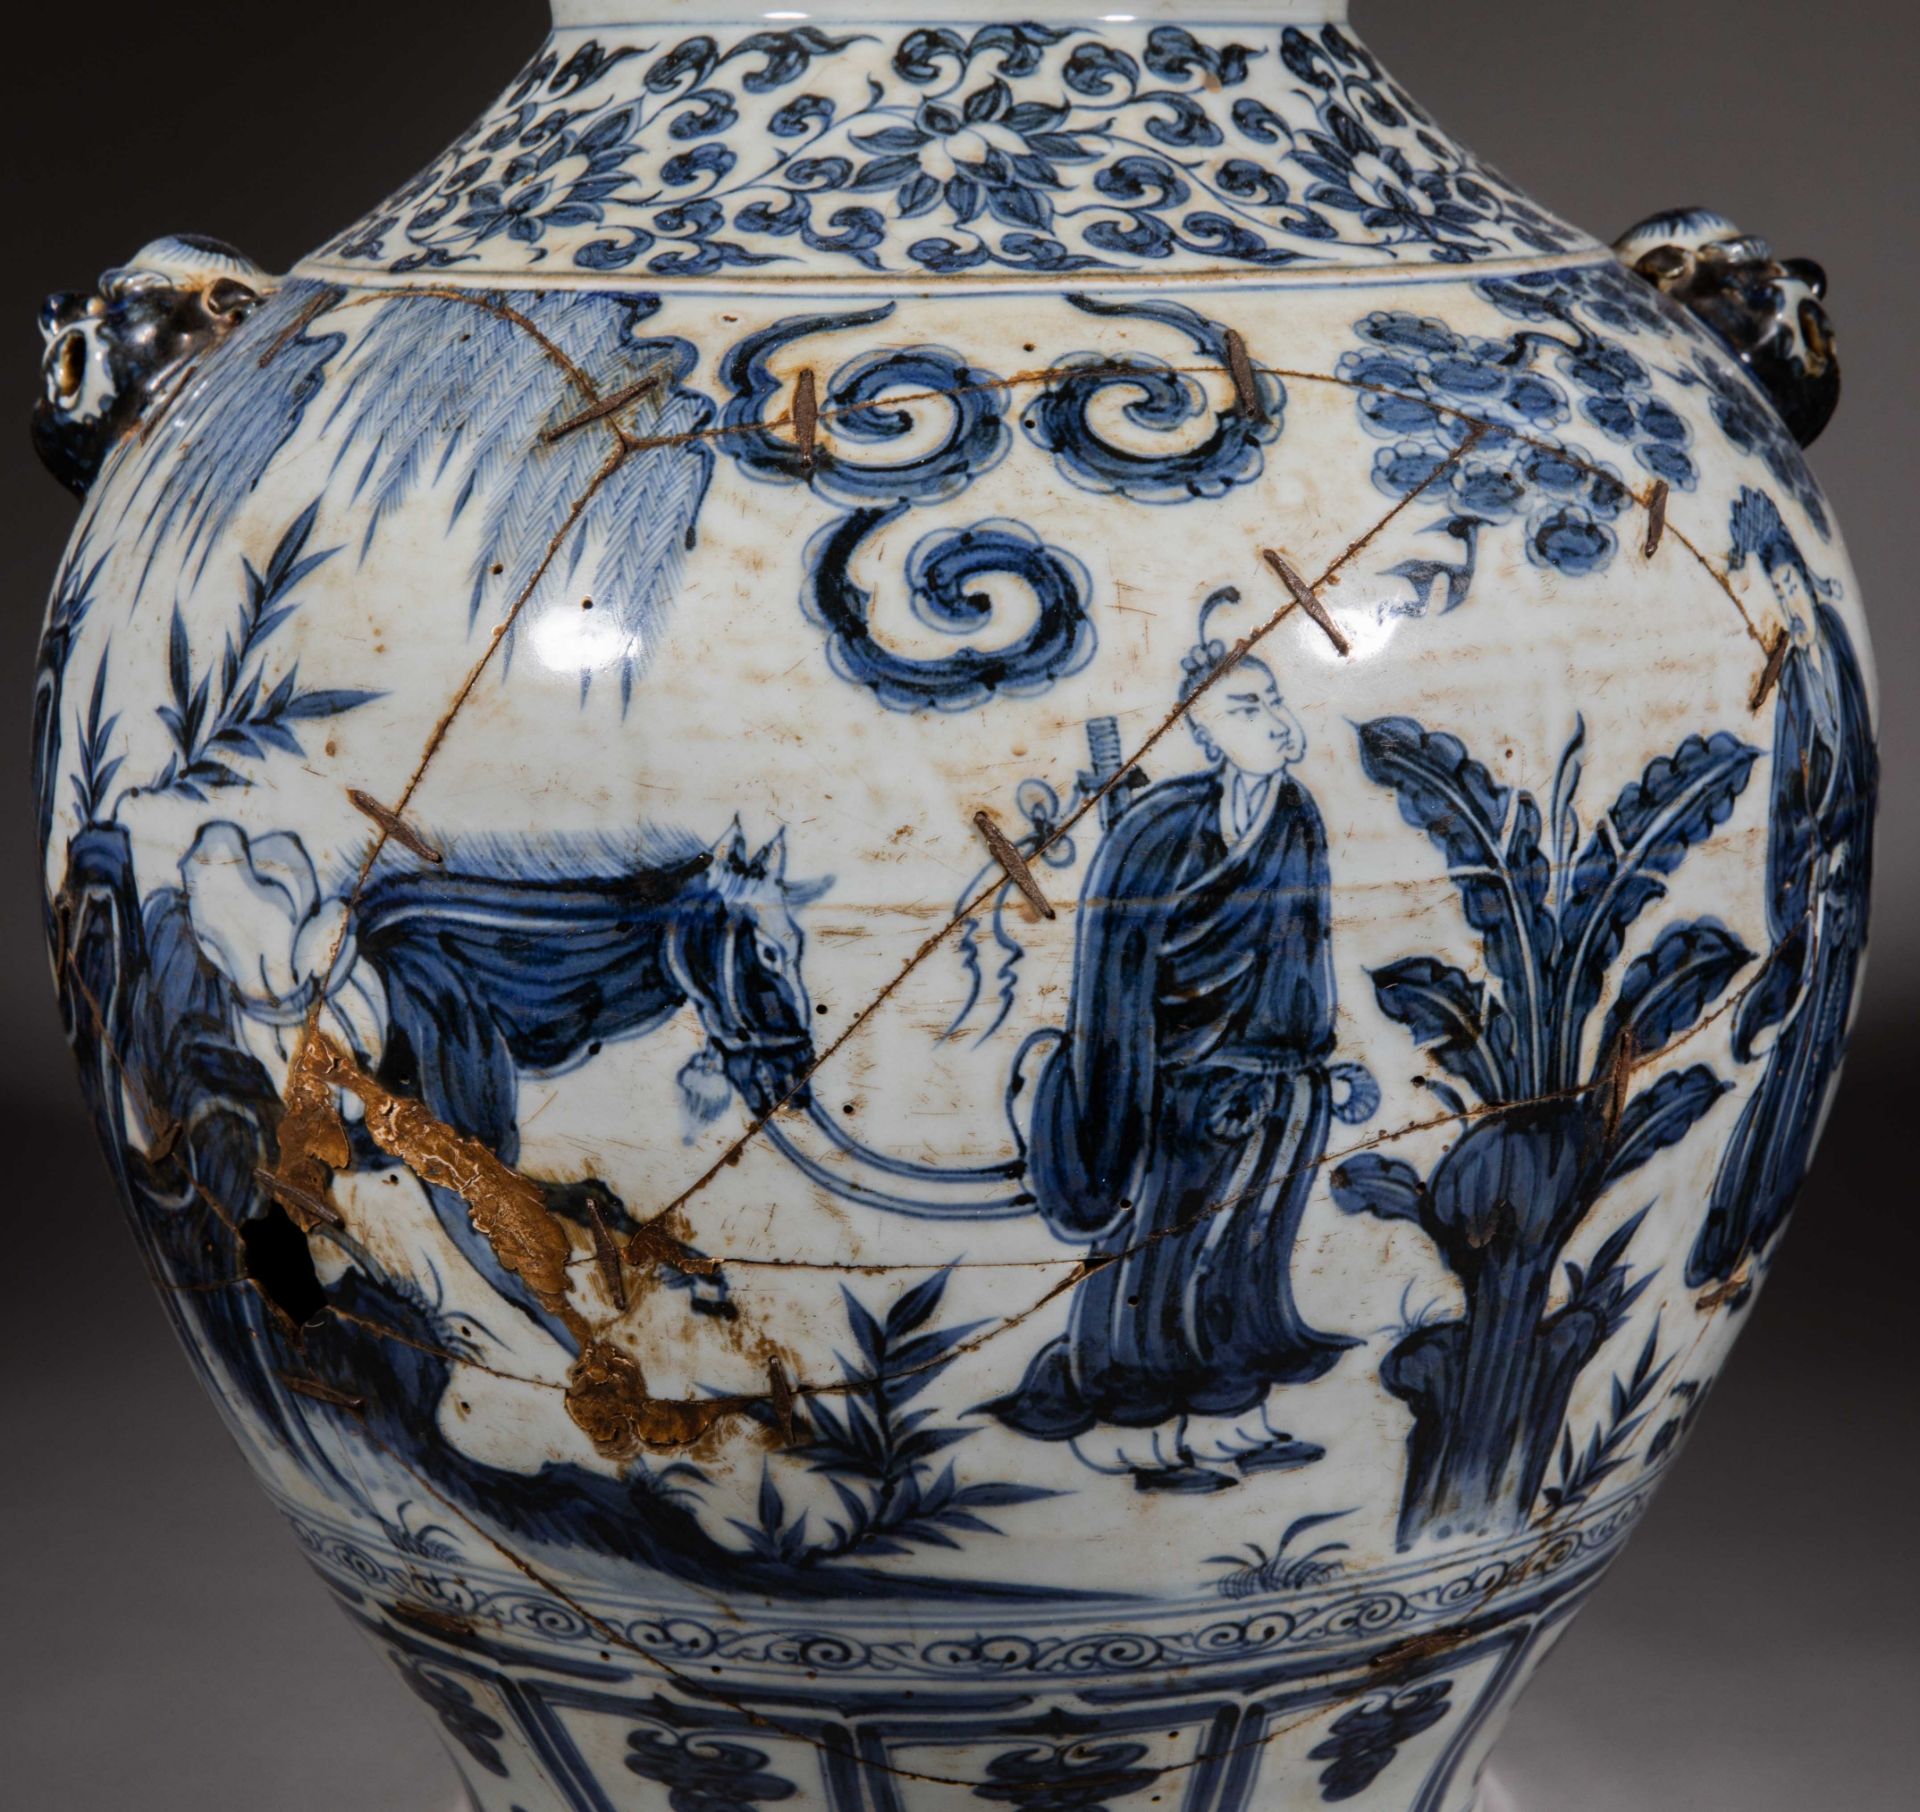 Blue and white porcelain vase from Yuan Dynasty - Image 3 of 9